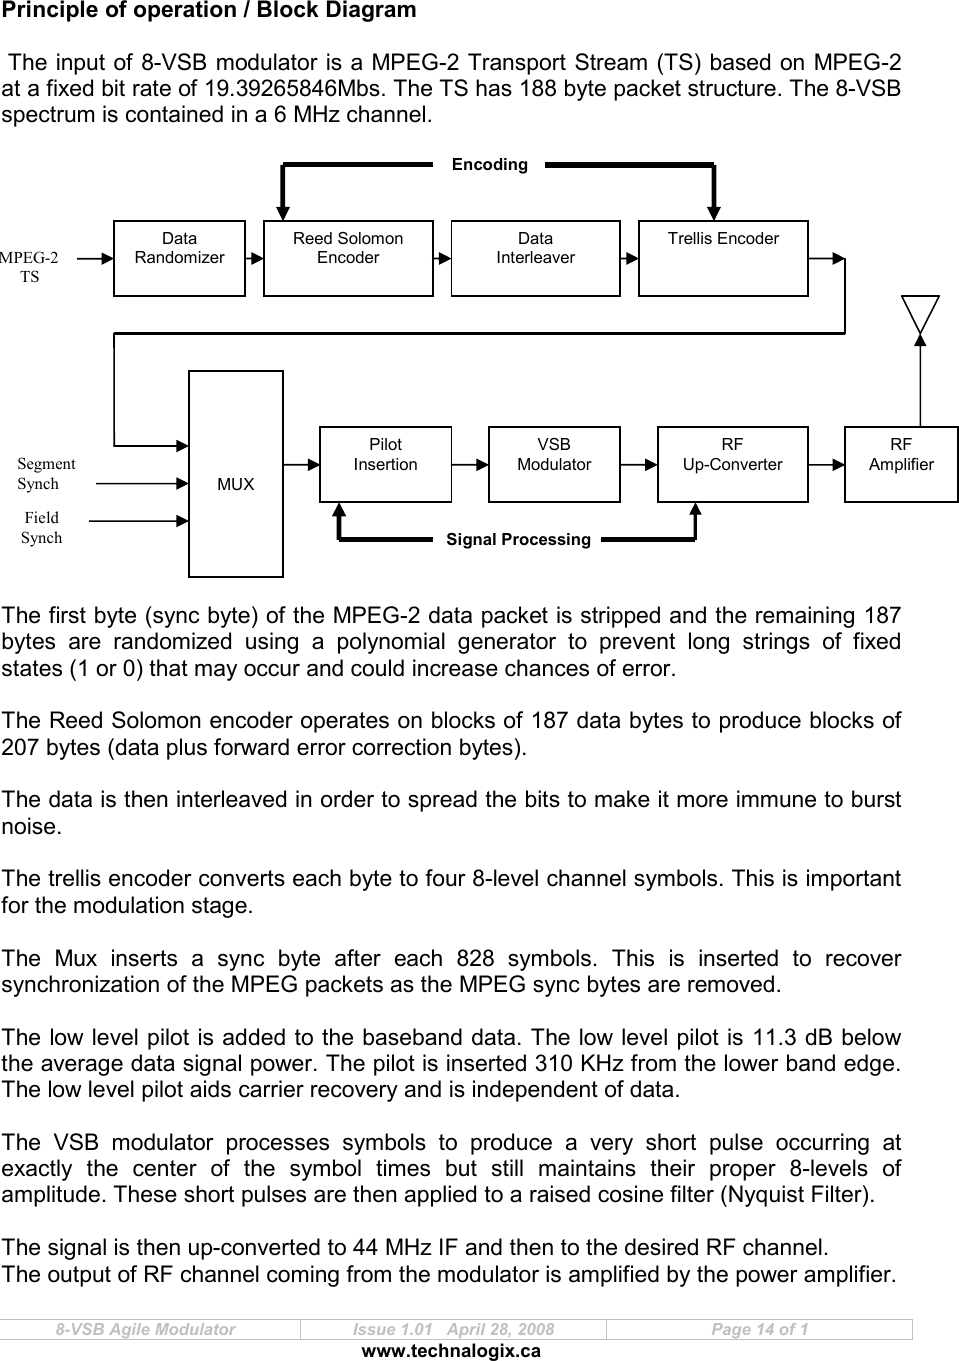  8-VSB Agile Modulator  Issue 1.01   April 28, 2008  Page 14 of 1 www.technalogix.ca     Principle of operation / Block Diagram   The input of 8-VSB modulator is a MPEG-2 Transport Stream (TS) based on MPEG-2 at a fixed bit rate of 19.39265846Mbs. The TS has 188 byte packet structure. The 8-VSB spectrum is contained in a 6 MHz channel.                   The first byte (sync byte) of the MPEG-2 data packet is stripped and the remaining 187 bytes  are  randomized  using  a  polynomial  generator  to  prevent  long  strings  of  fixed states (1 or 0) that may occur and could increase chances of error.  The Reed Solomon encoder operates on blocks of 187 data bytes to produce blocks of 207 bytes (data plus forward error correction bytes).  The data is then interleaved in order to spread the bits to make it more immune to burst noise.  The trellis encoder converts each byte to four 8-level channel symbols. This is important for the modulation stage.   The  Mux  inserts  a  sync  byte  after  each  828  symbols.  This  is  inserted  to  recover synchronization of the MPEG packets as the MPEG sync bytes are removed.  The low level pilot is added to the baseband data. The low level pilot is 11.3 dB below the average data signal power. The pilot is inserted 310 KHz from the lower band edge. The low level pilot aids carrier recovery and is independent of data.   The  VSB  modulator  processes  symbols  to  produce  a  very  short  pulse  occurring  at exactly  the  center  of  the  symbol  times  but  still  maintains  their  proper  8-levels  of amplitude. These short pulses are then applied to a raised cosine filter (Nyquist Filter).   The signal is then up-converted to 44 MHz IF and then to the desired RF channel.   The output of RF channel coming from the modulator is amplified by the power amplifier.     MUX Pilot Insertion VSB Modulator RF Up-Converter Signal Processing Encoding MPEG-2 TS Data Randomizer Reed Solomon Encoder Data Interleaver Trellis Encoder Segment Synch Field  Synch RF Amplifier 